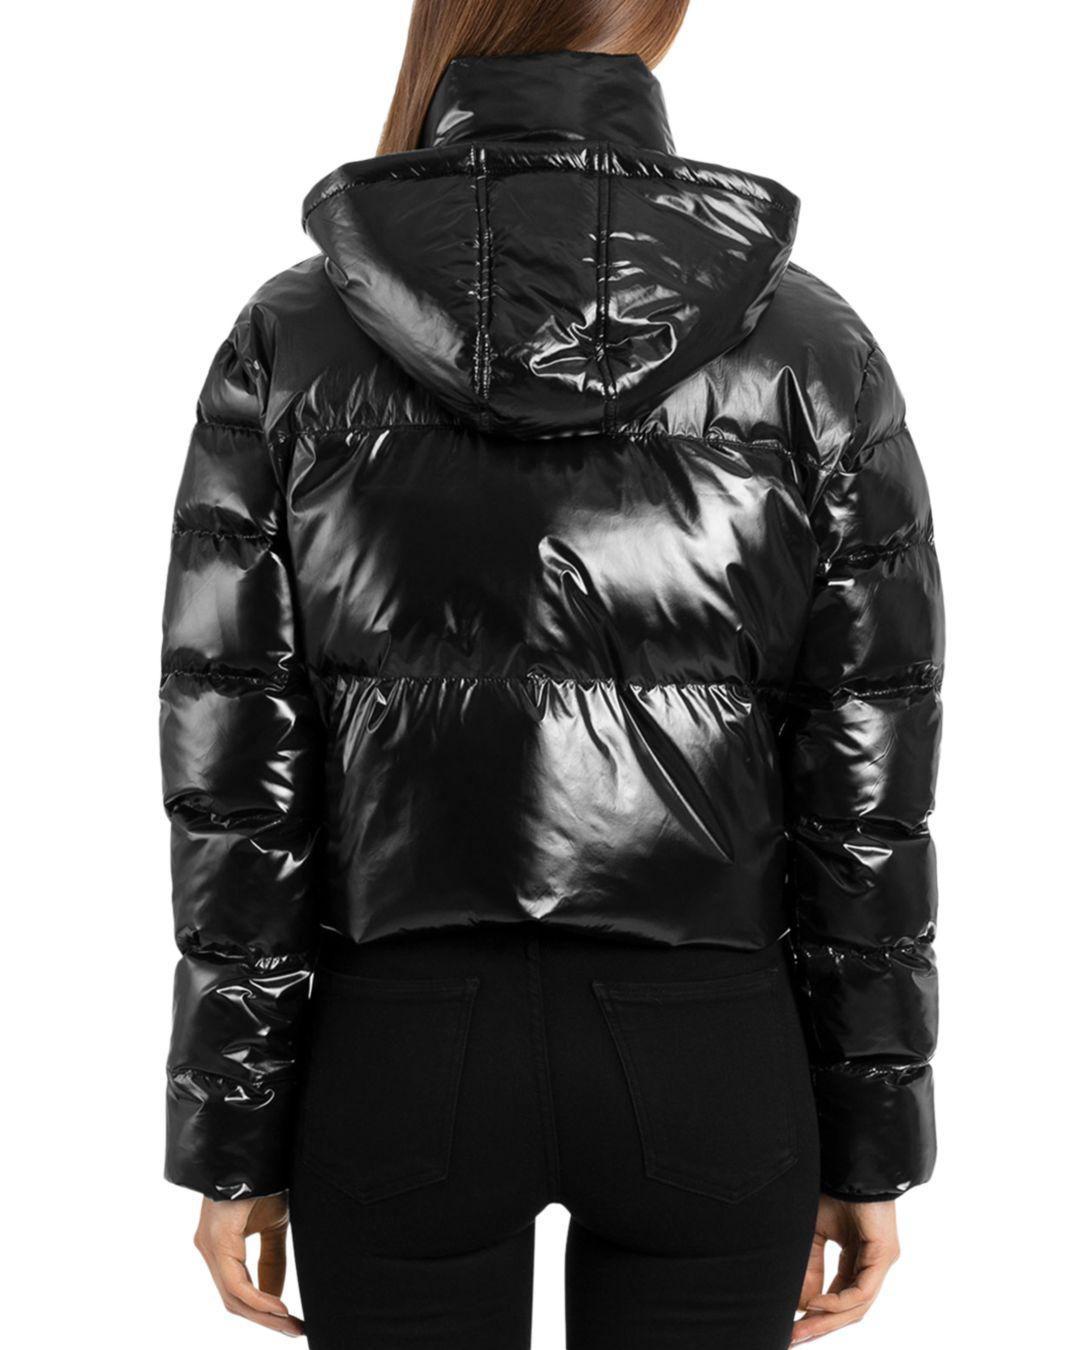 BAGATELLE.NYC Cropped Hooded Puffer Jacket in Black - Lyst